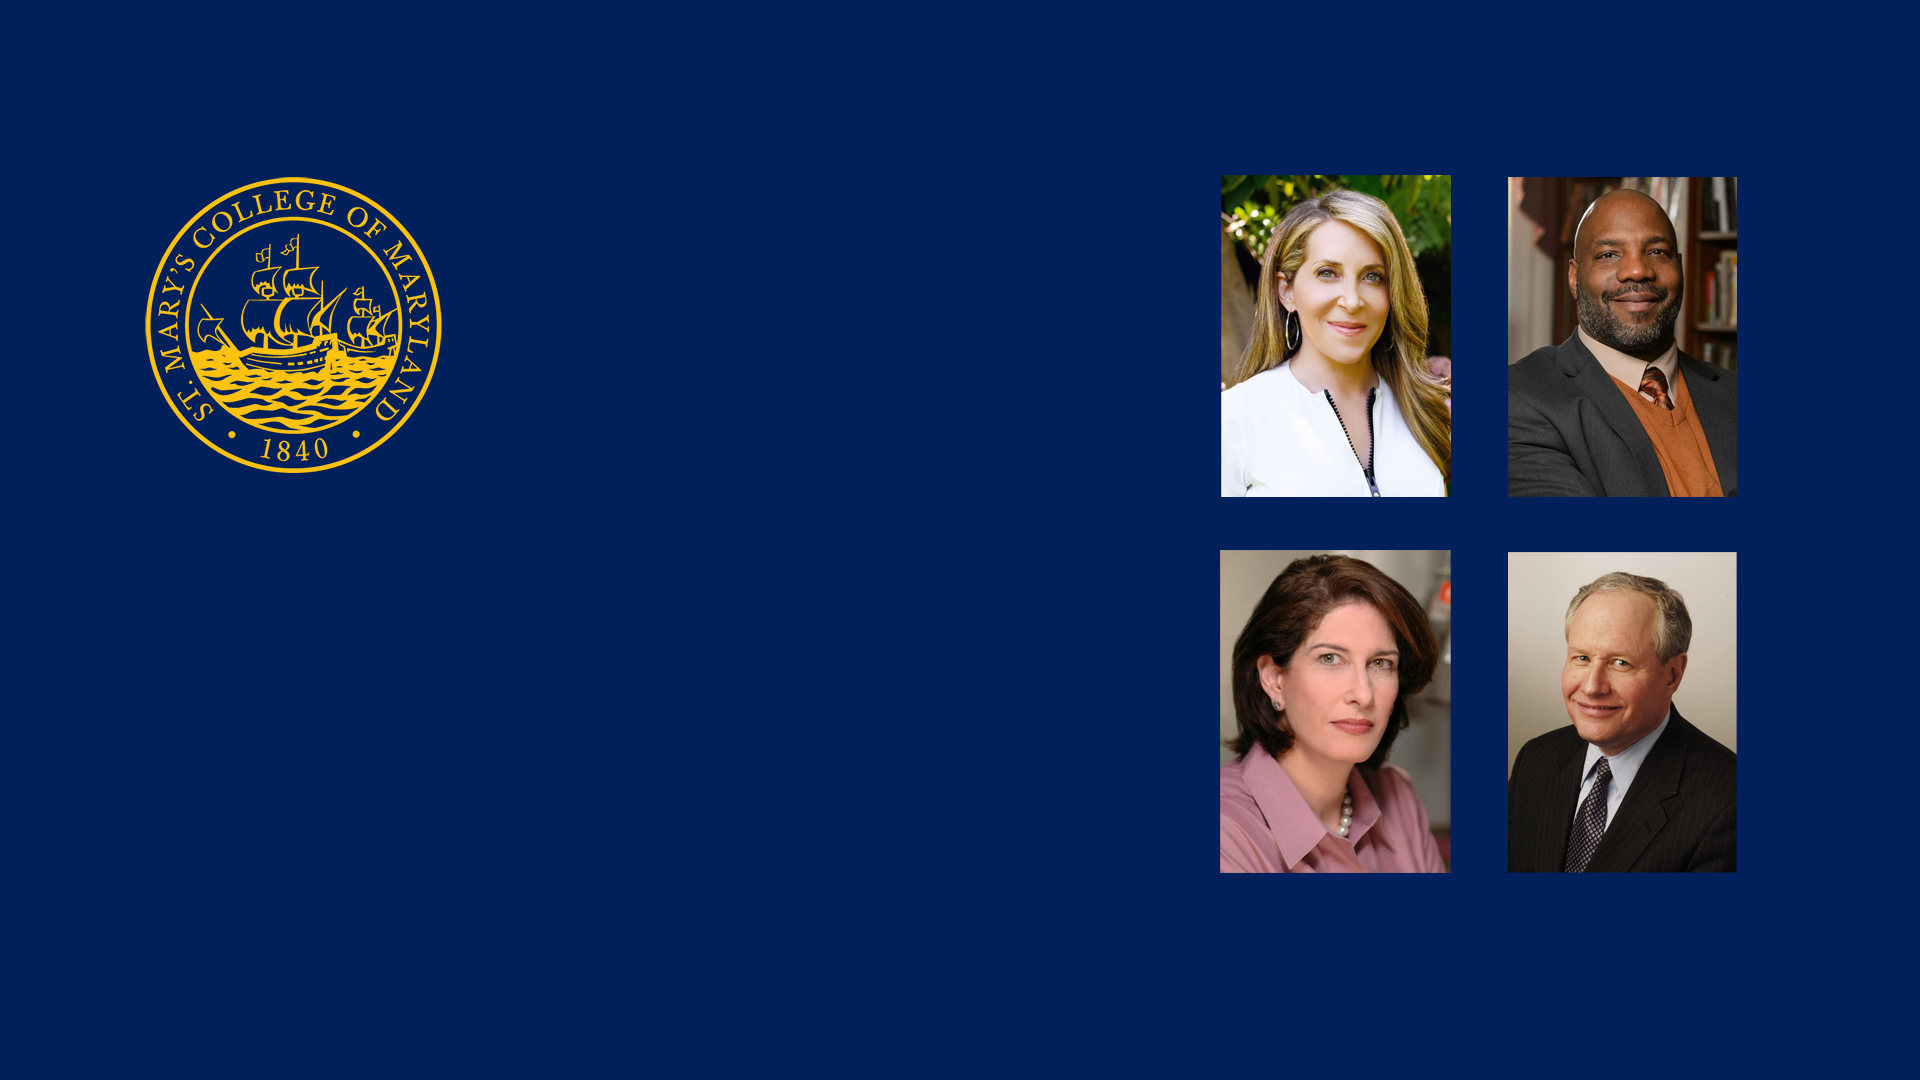 Solid navy background with the presidential seal of St. Mary's College of Maryland with the headshots of JESSICA YELLIN, Jelani Cobb, Mara Liasson, and Bill Kristol